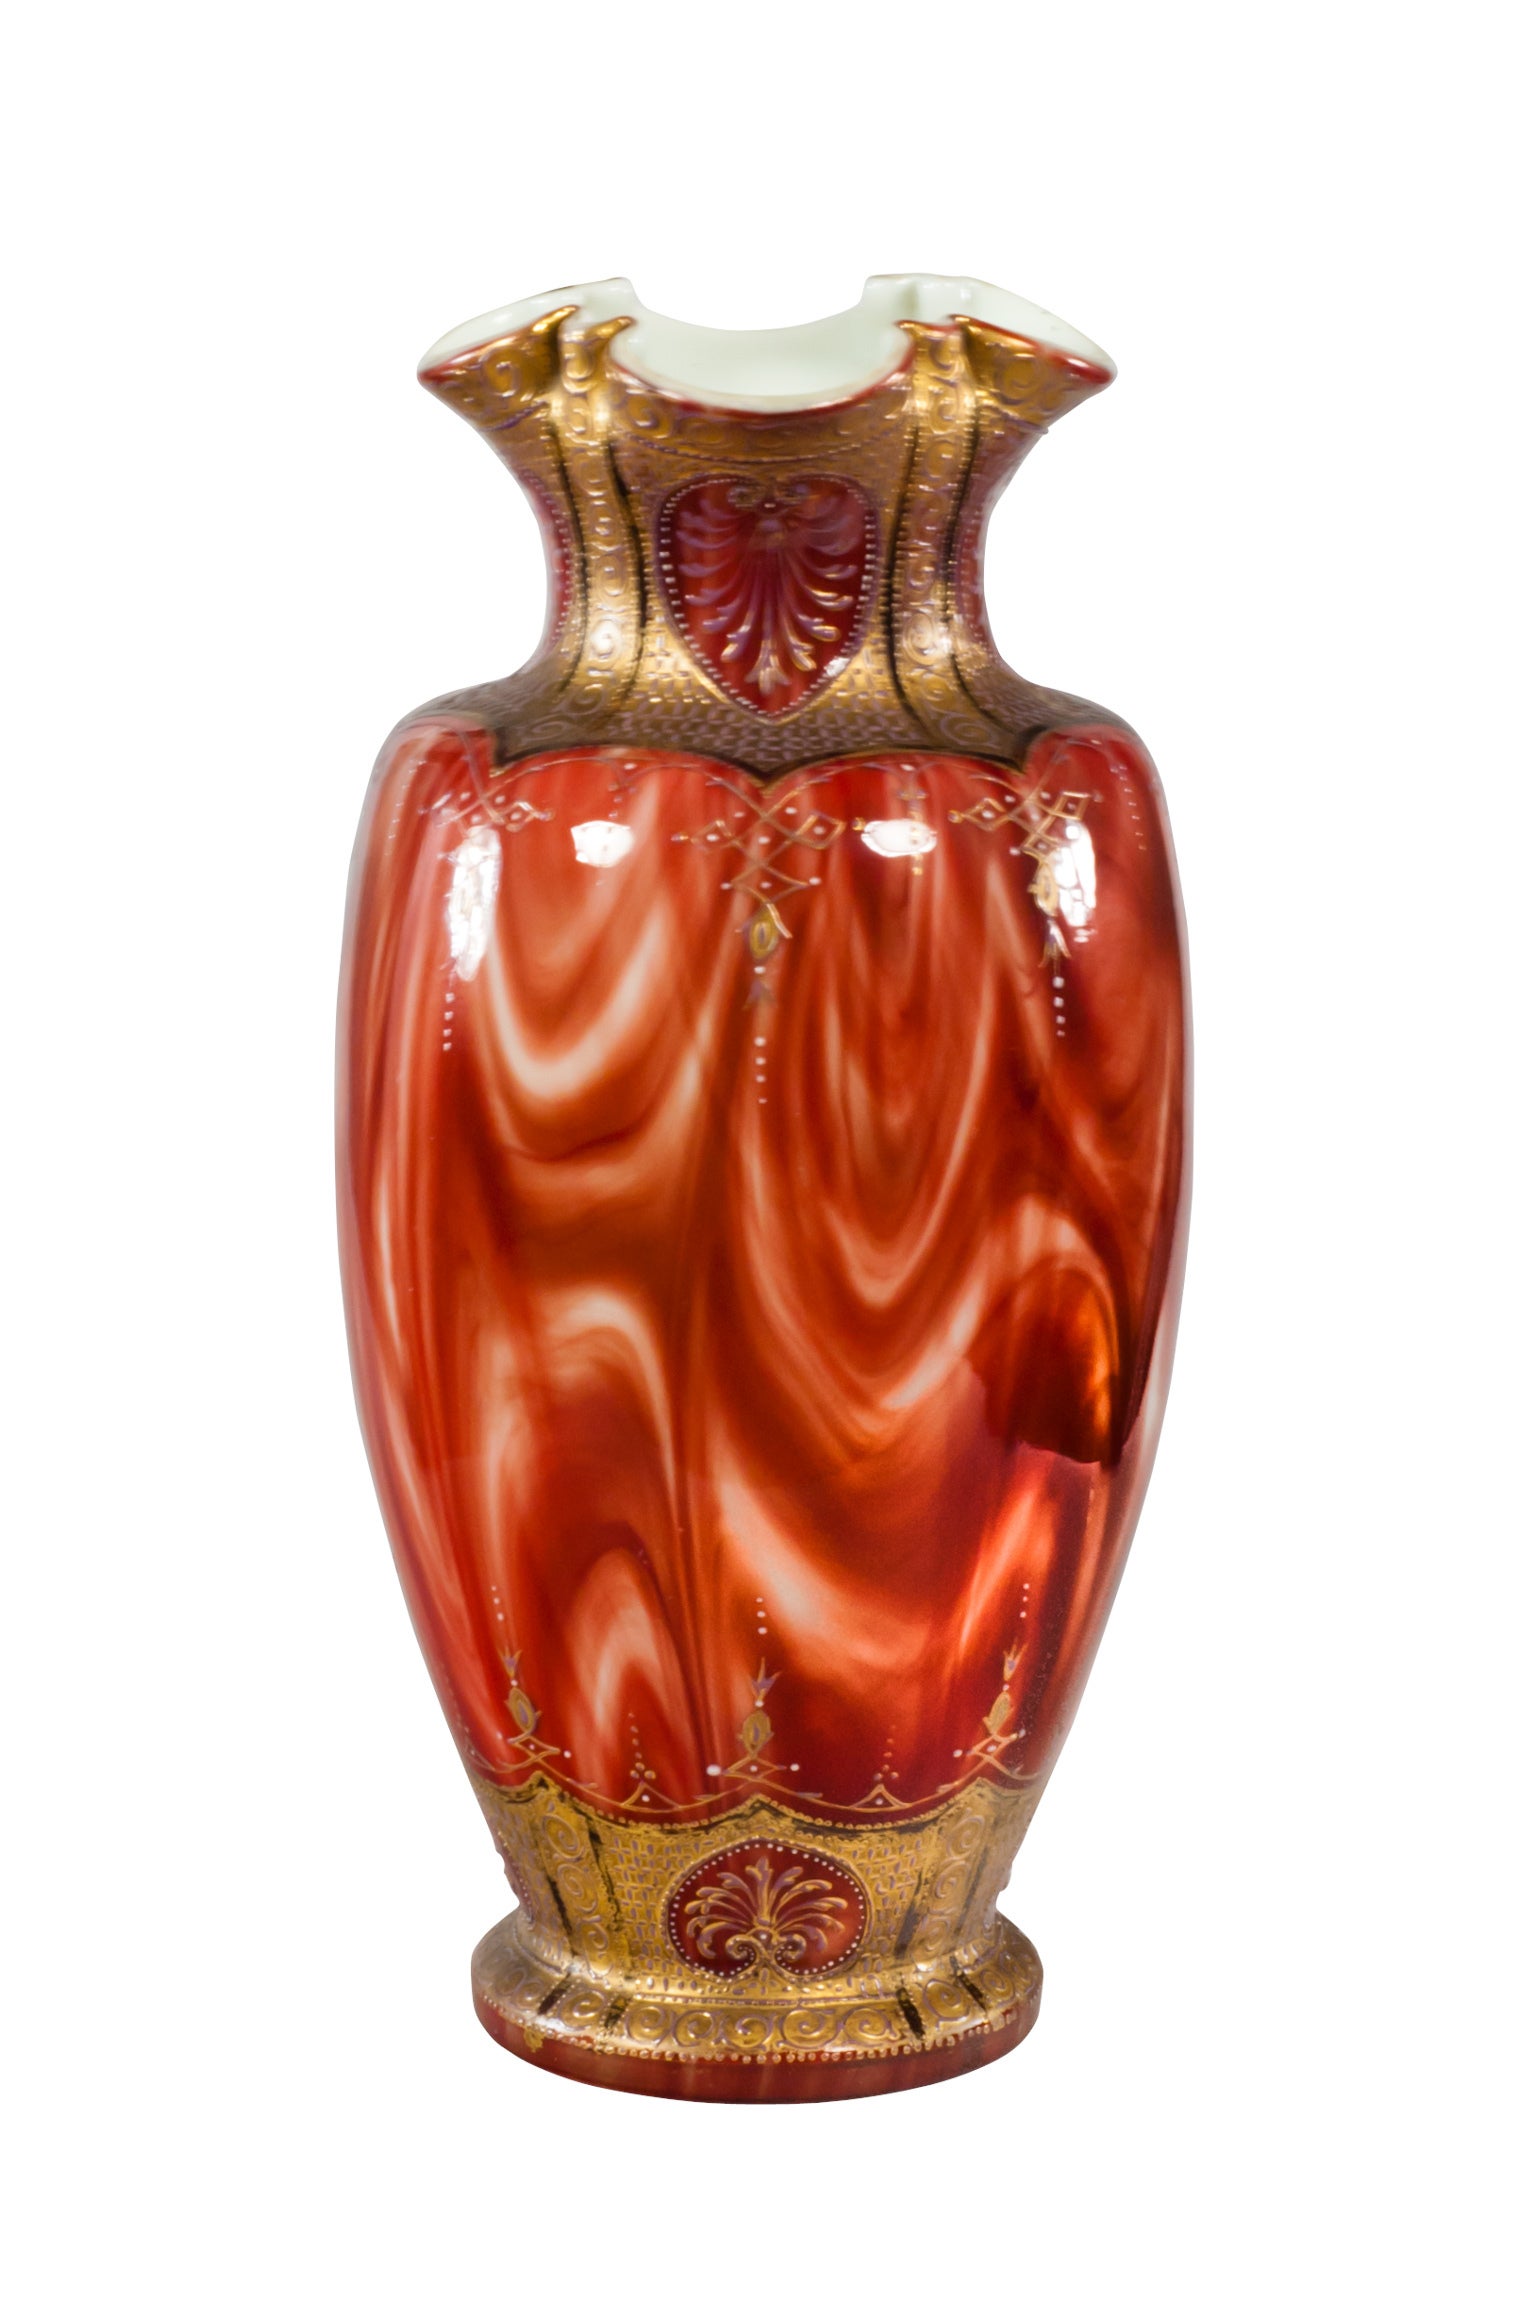 Early Loetz Vase Red Carneol Semi-Precious Stone Appearance, circa 1890 For Sale